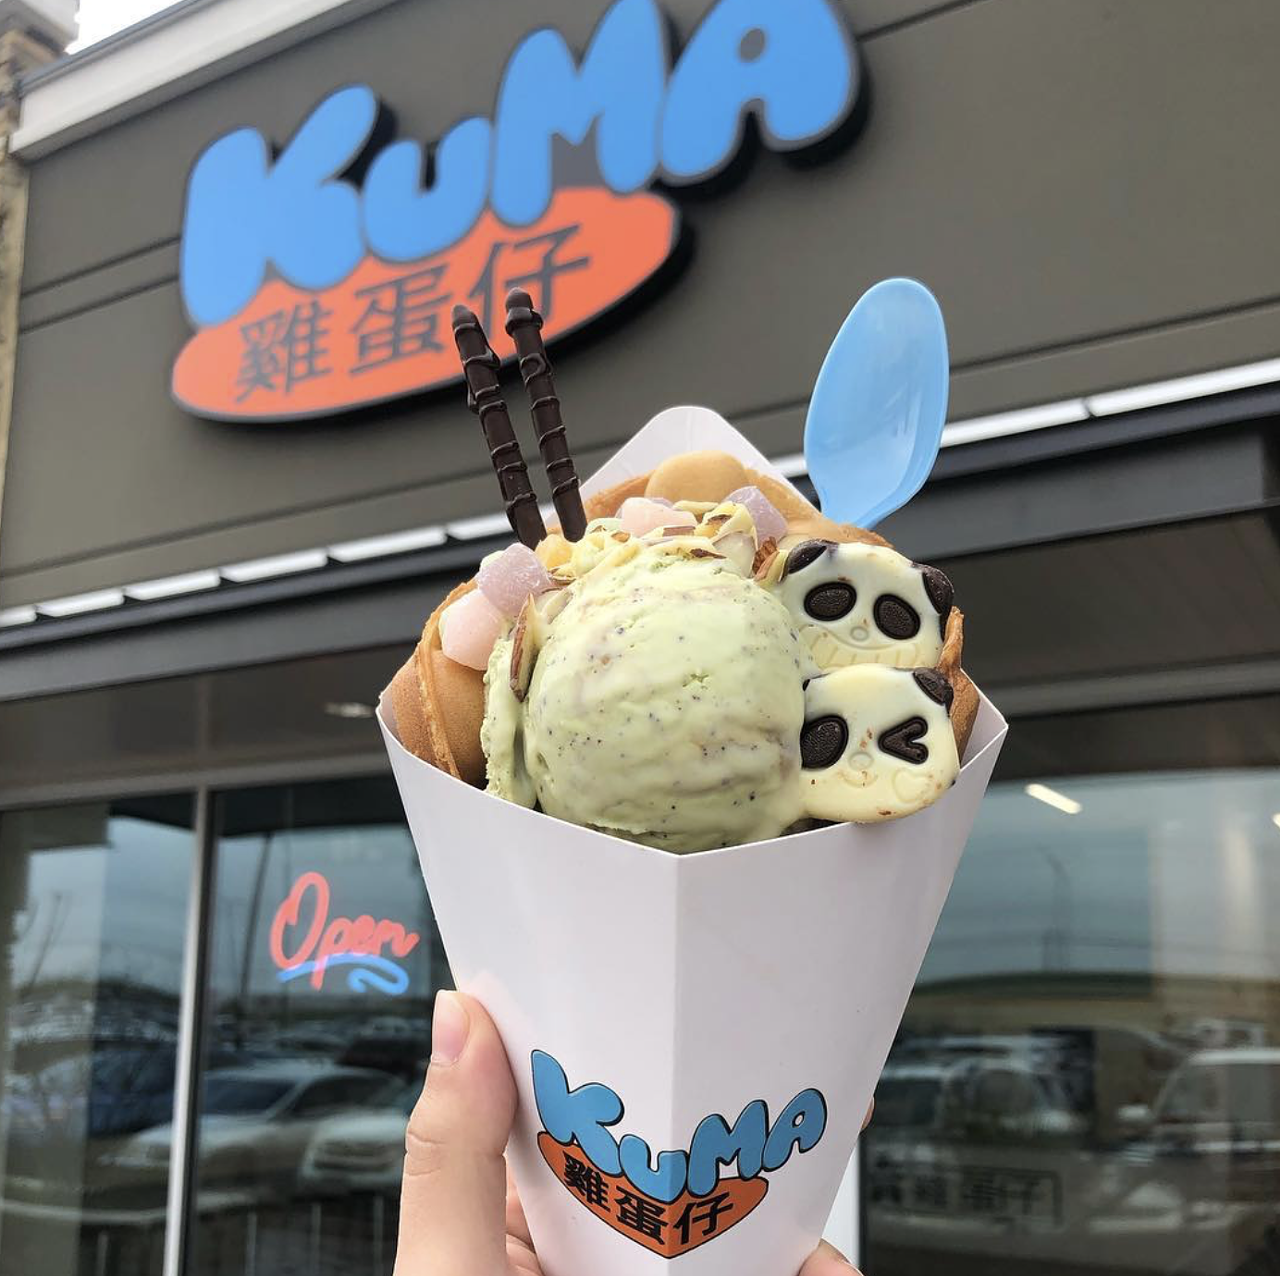 Kuma - Northwest
6565 Babcock Road
The original Northwest San Antonio location of sweet-shop chain Kuma permanently closed in May of this year, ending a nearly four-year run of doling out authentic Hong Kong-style waffle cones piled high with ice cream and toppings. Two other locations remain open.  
Photo via Instagram / kuma.satx